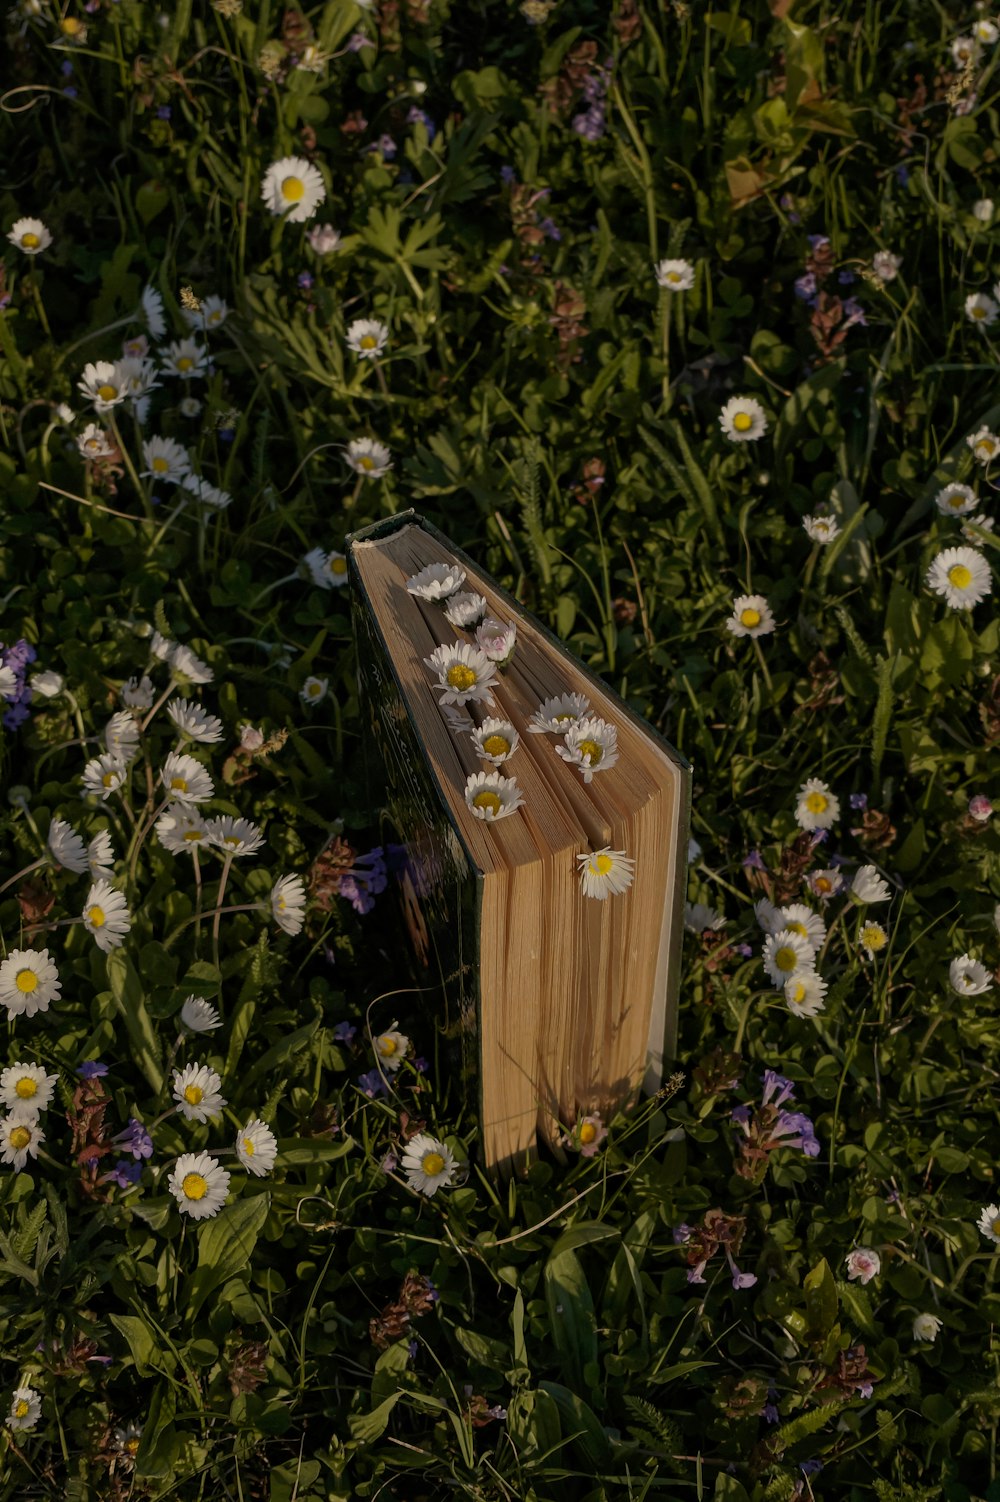 a wooden birdhouse surrounded by flowers